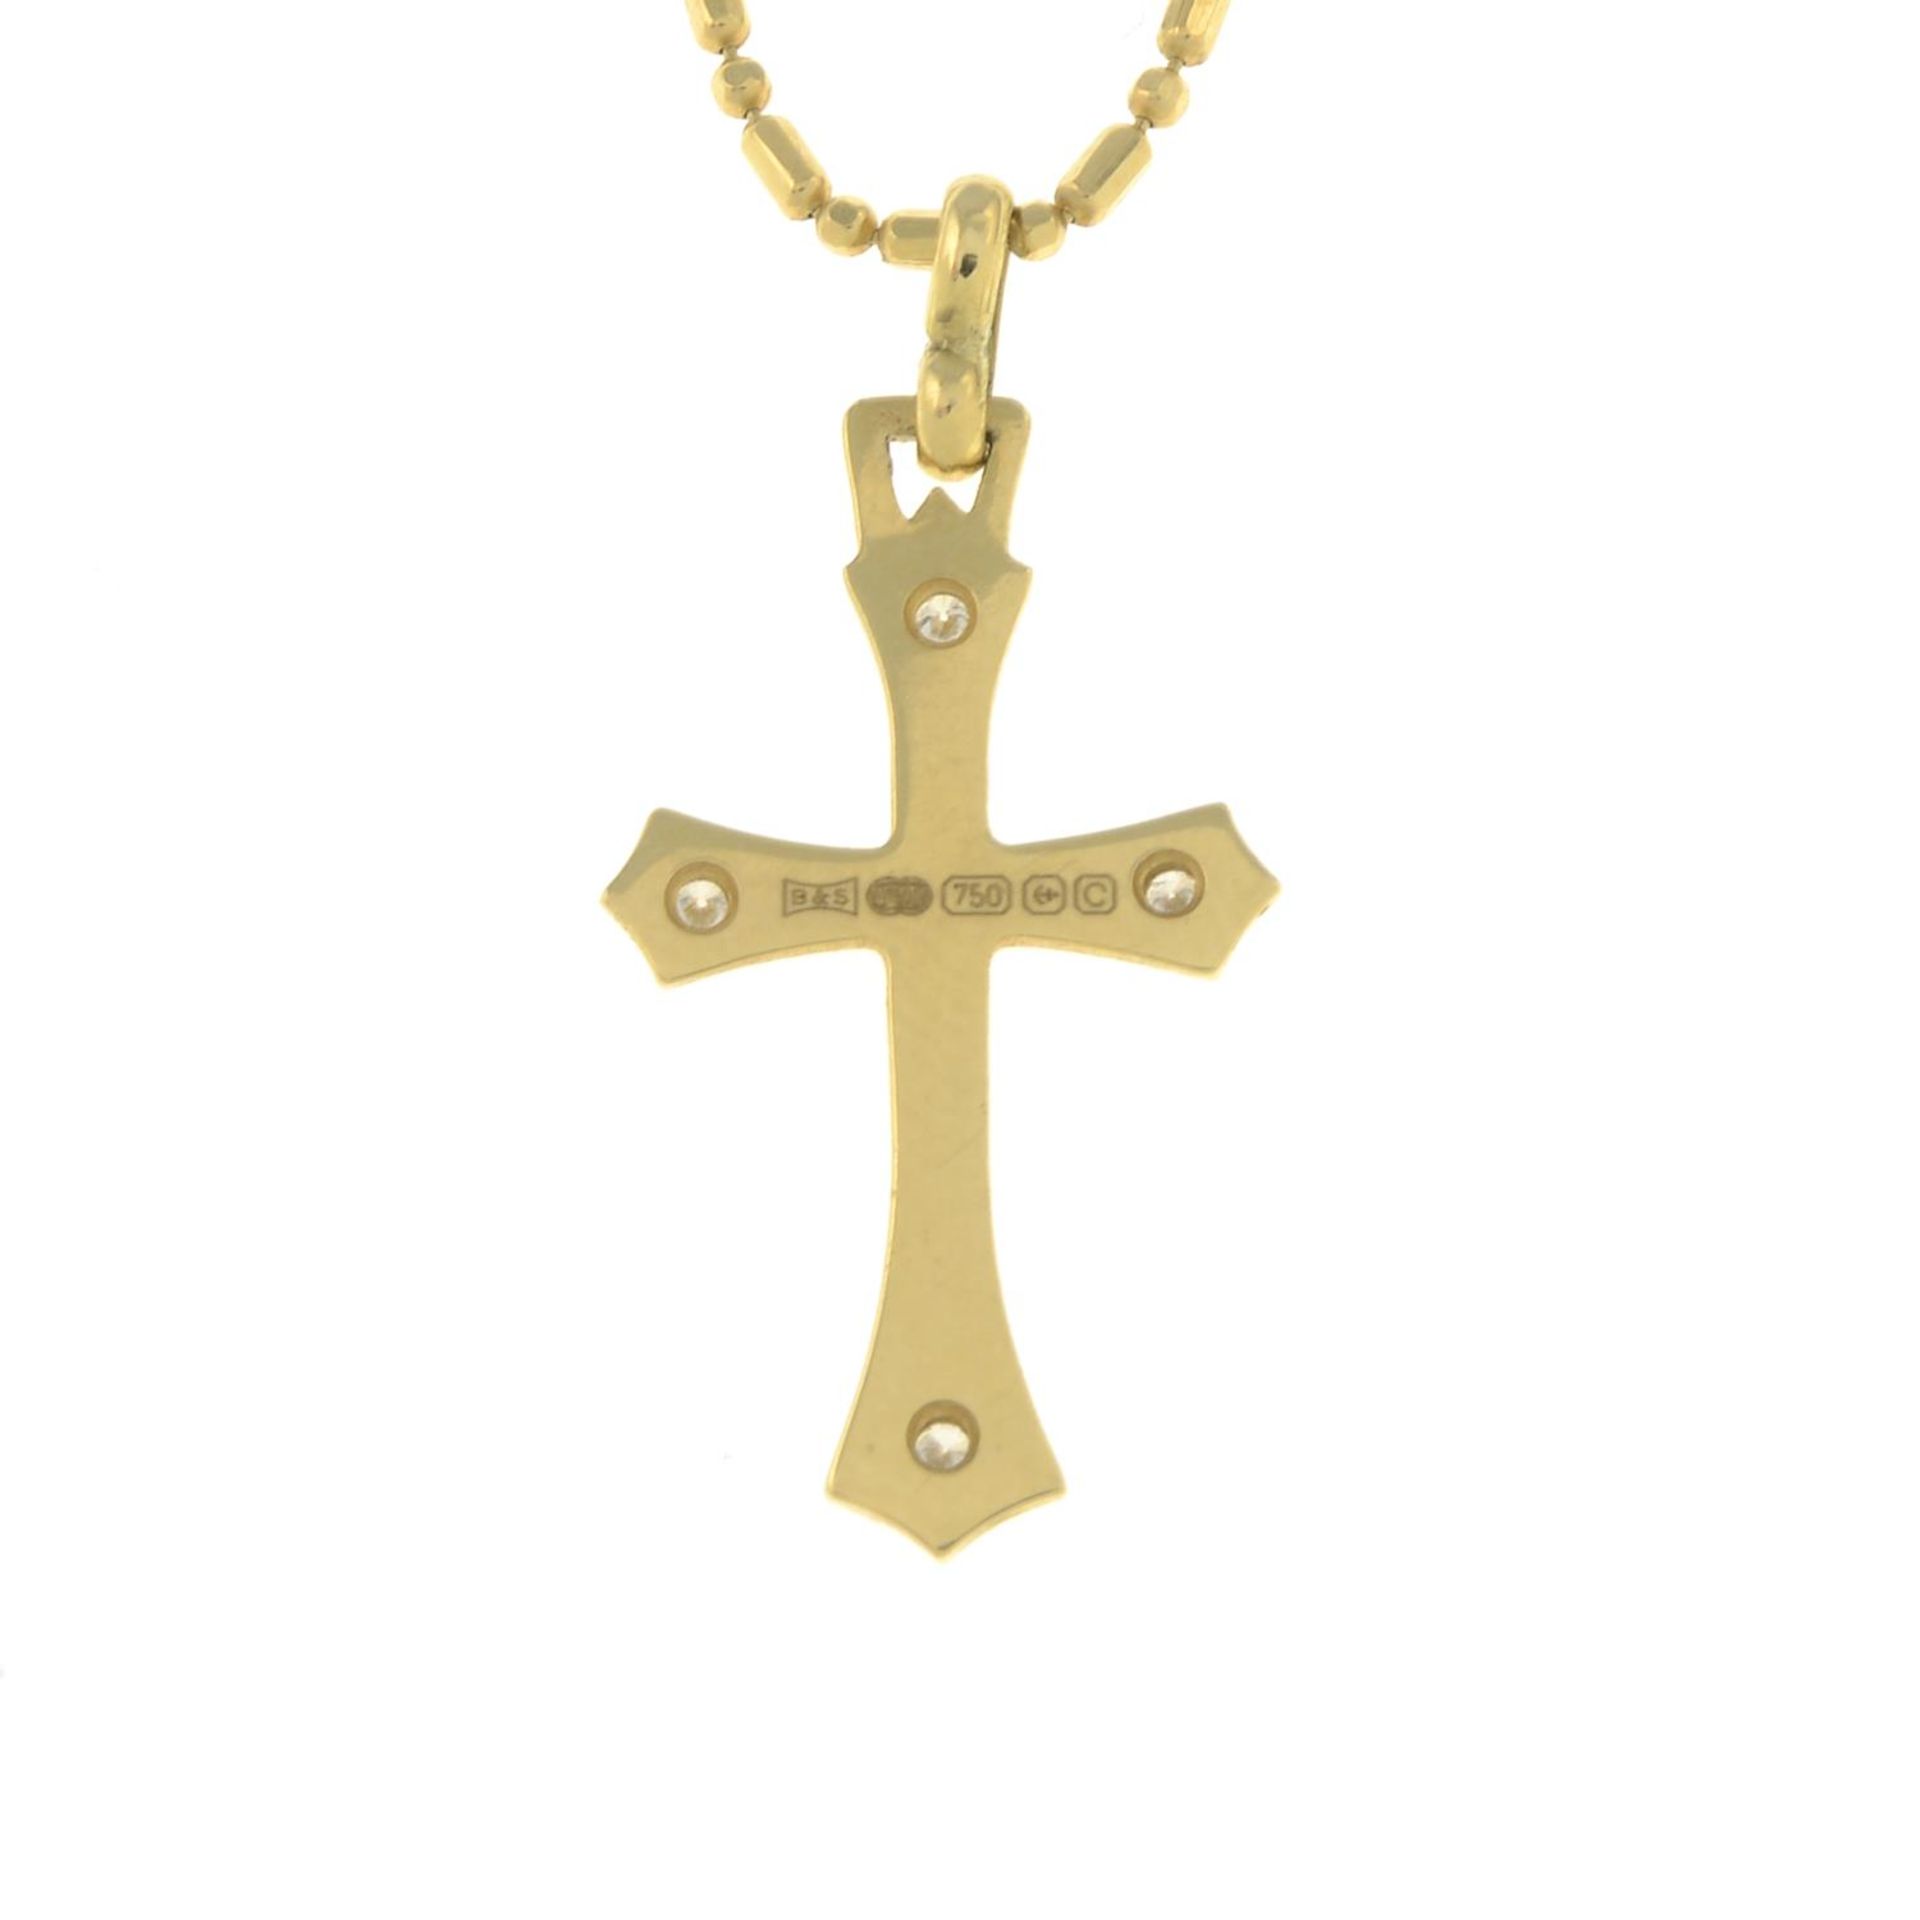 An 18ct gold diamond cross pendant, with 18ct gold chain. - Image 2 of 2